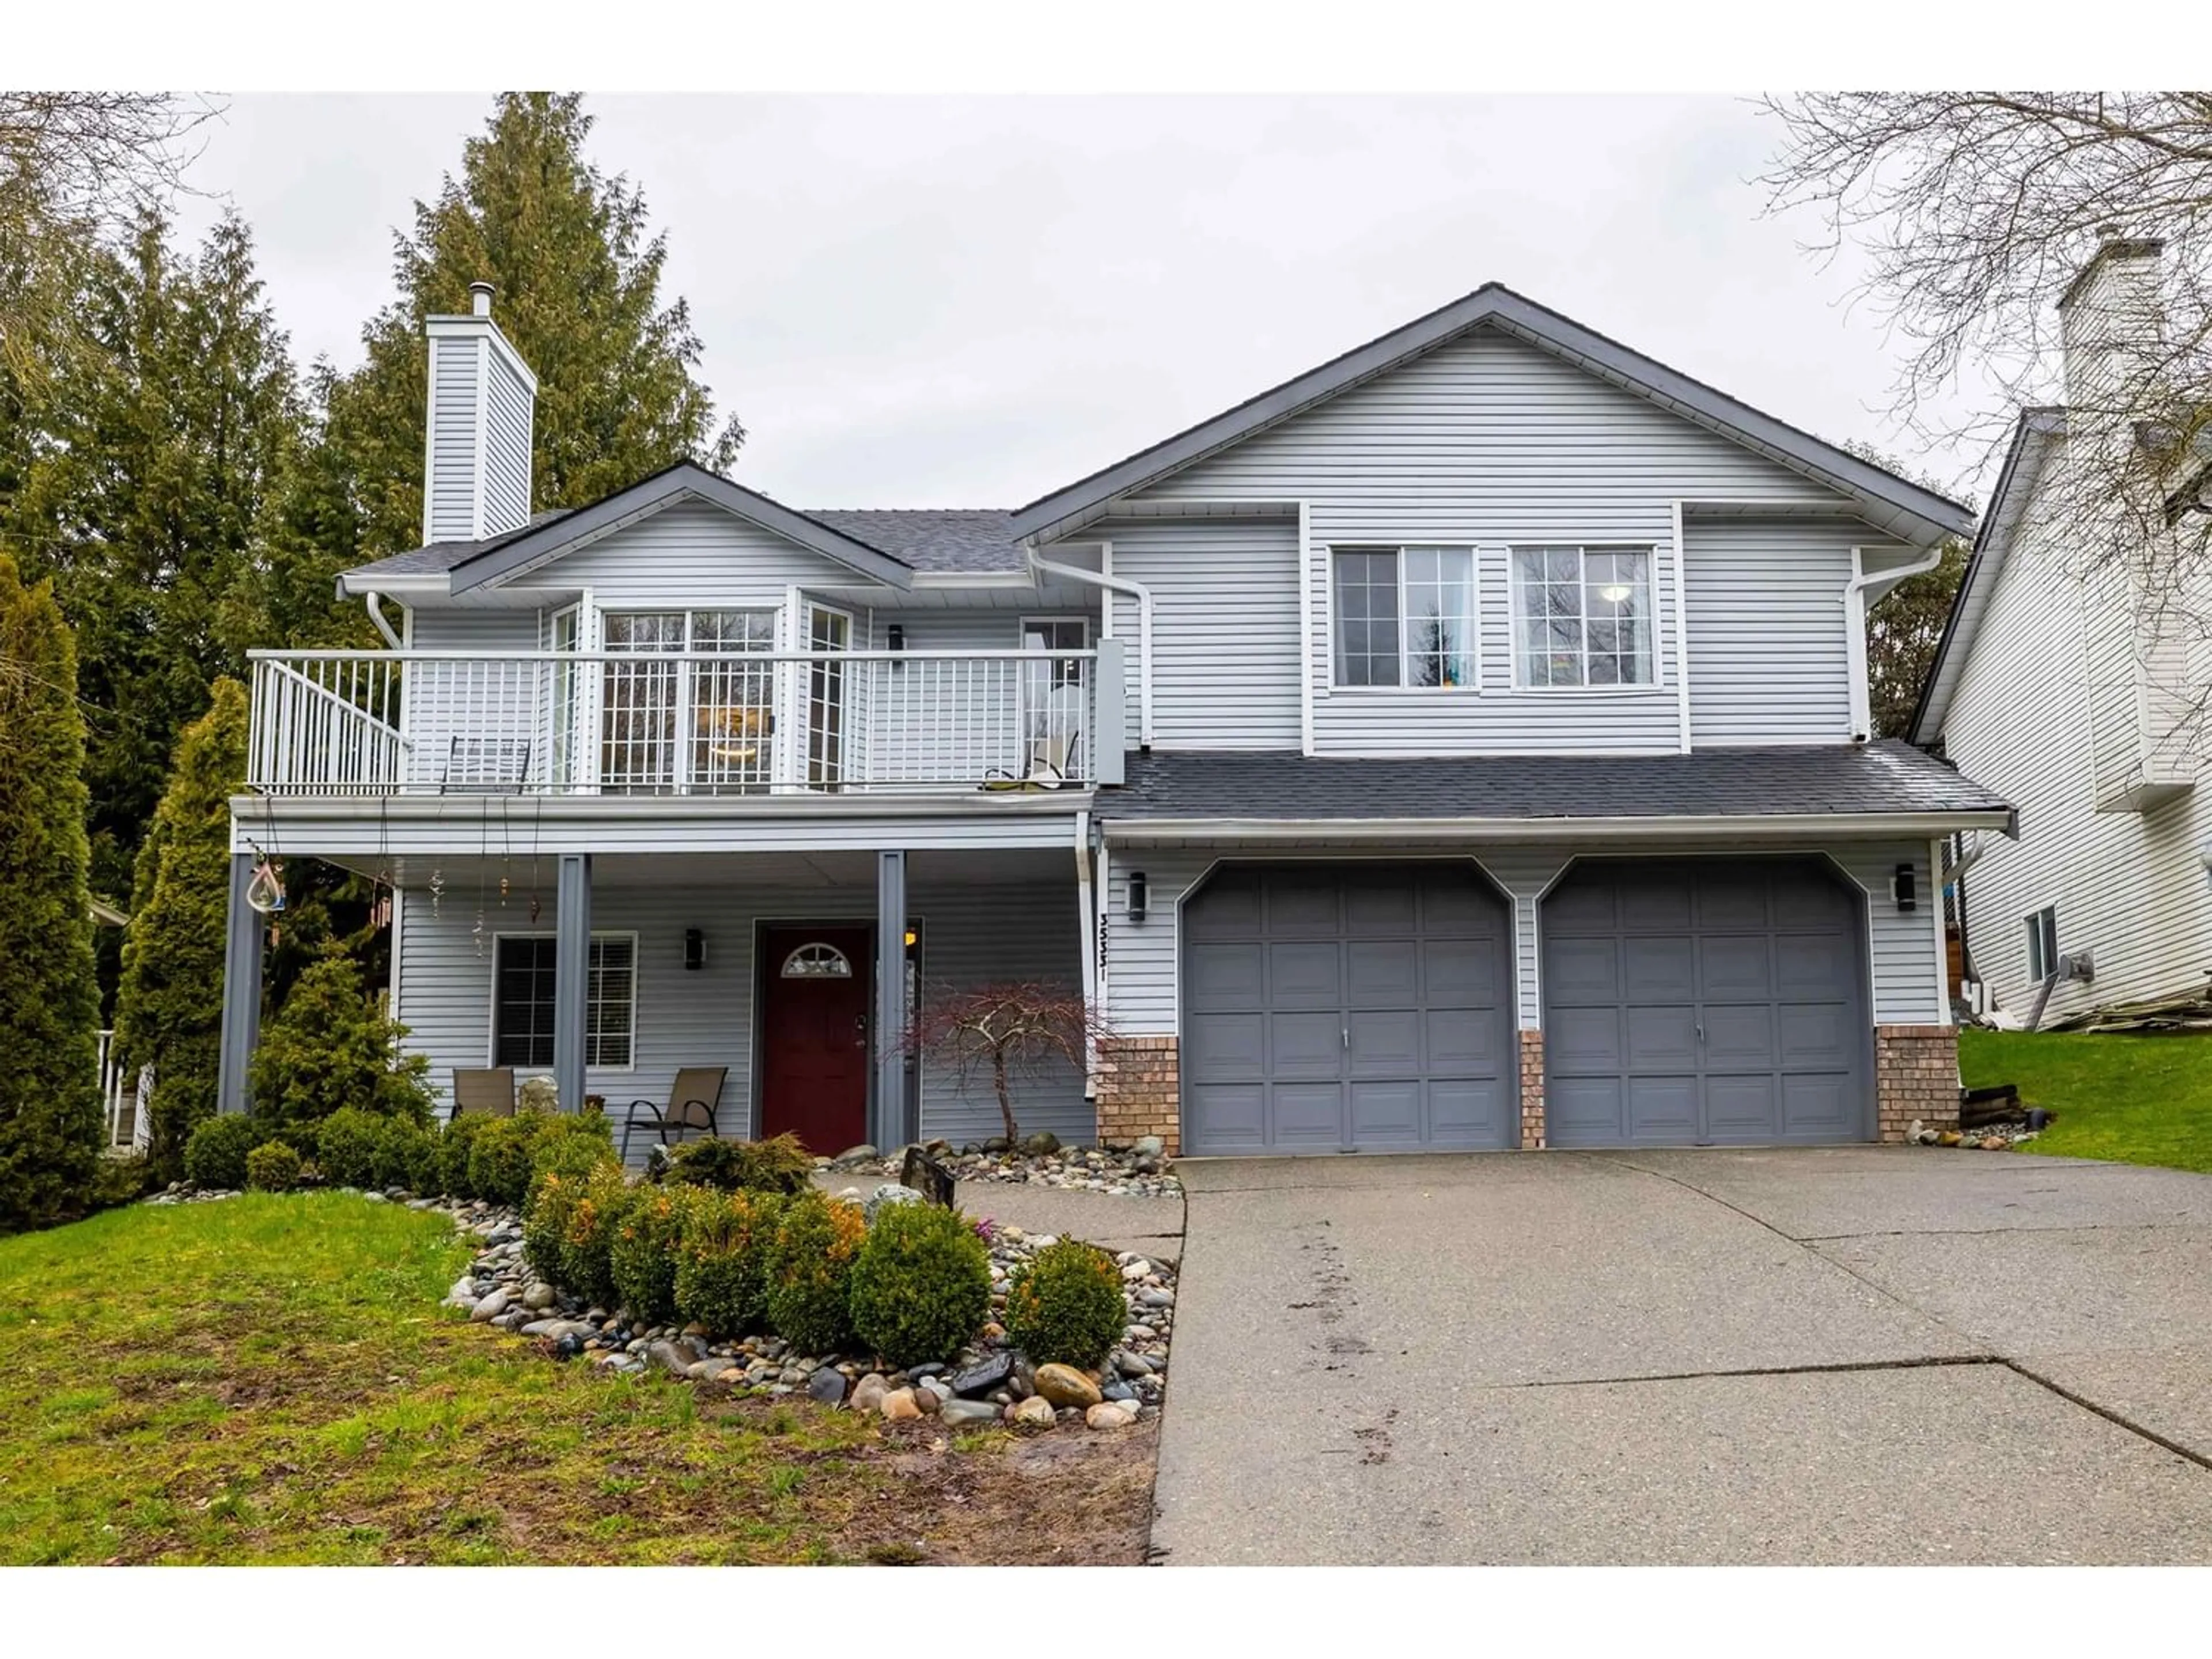 Frontside or backside of a home for 35331 SANDY HILL ROAD, Abbotsford British Columbia V3G1J2